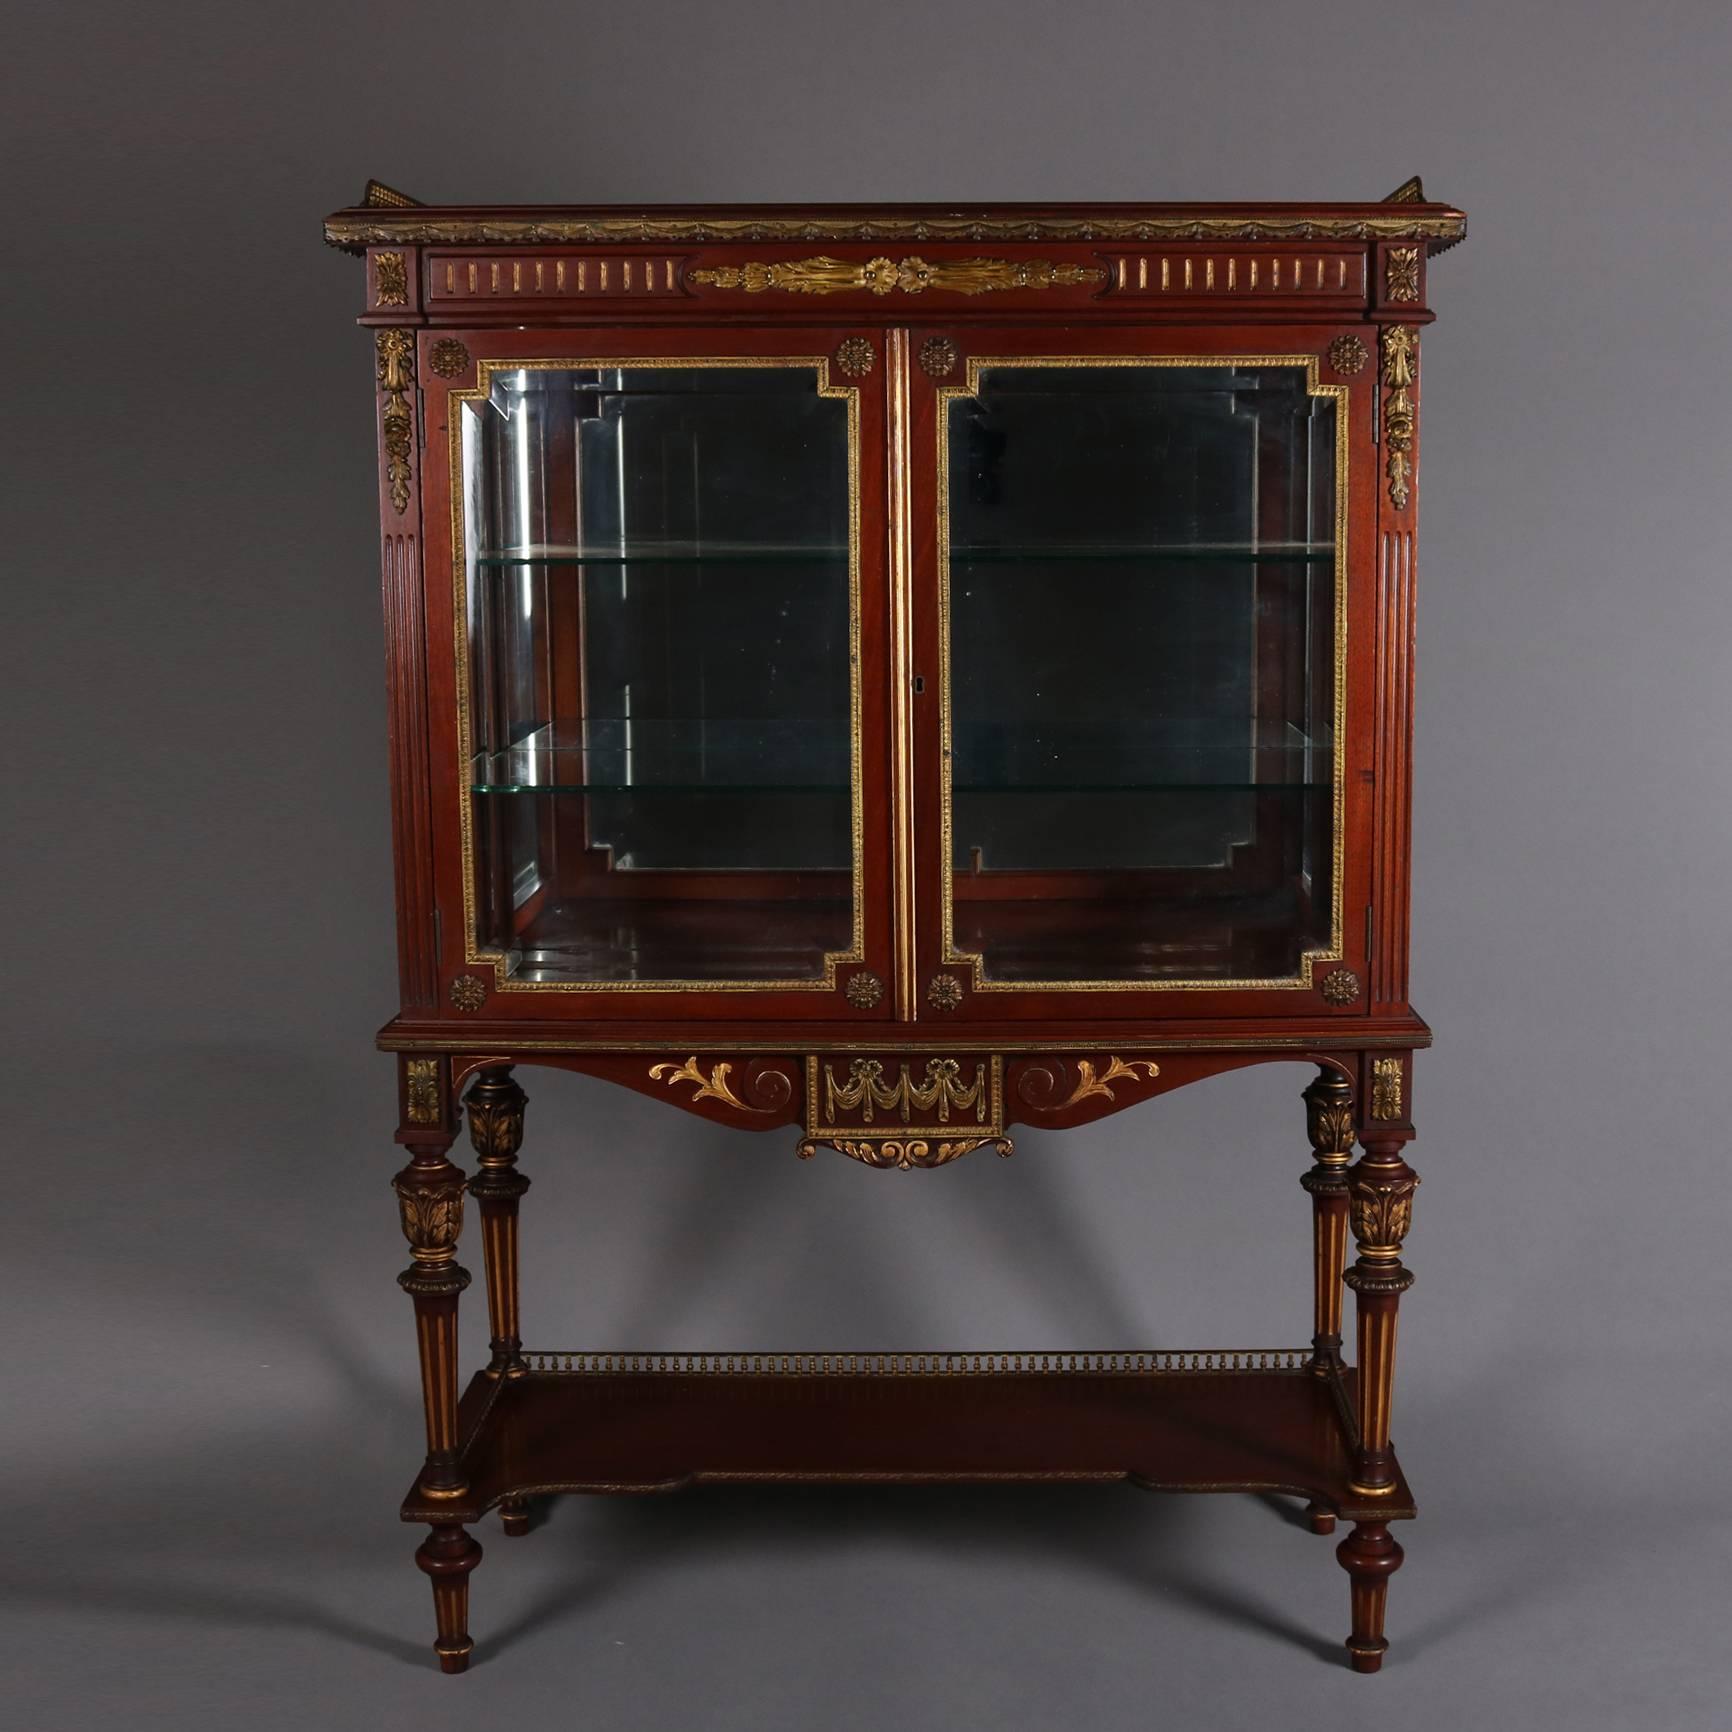 Antique French Louis XVI style vitrine features mahogany construction, cast bronze accoutrements and upper gallery, gilt highlights, swag and foliate decorated apron, two glass front doors opening to mirrored back interior with glass shelving, lower